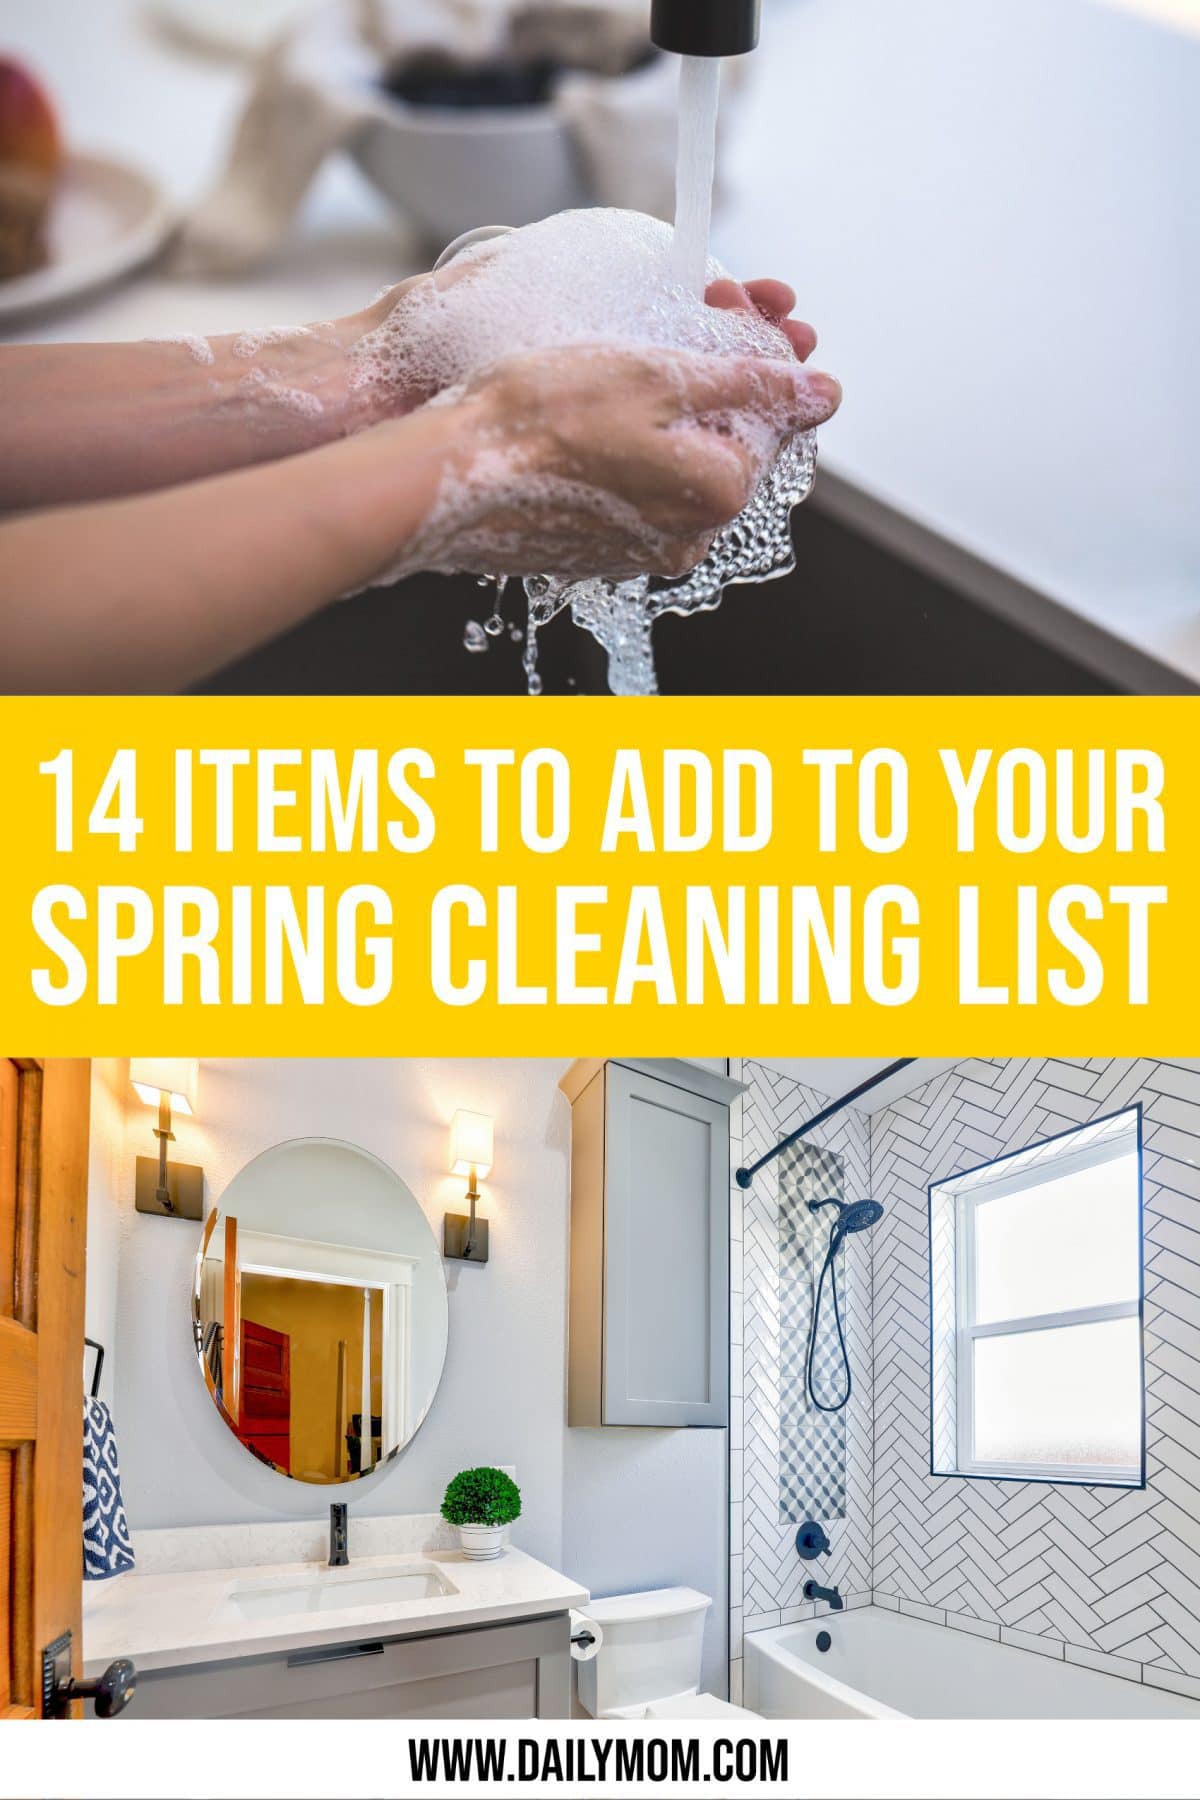 14 Items To Add To Your List For Spring Cleaning